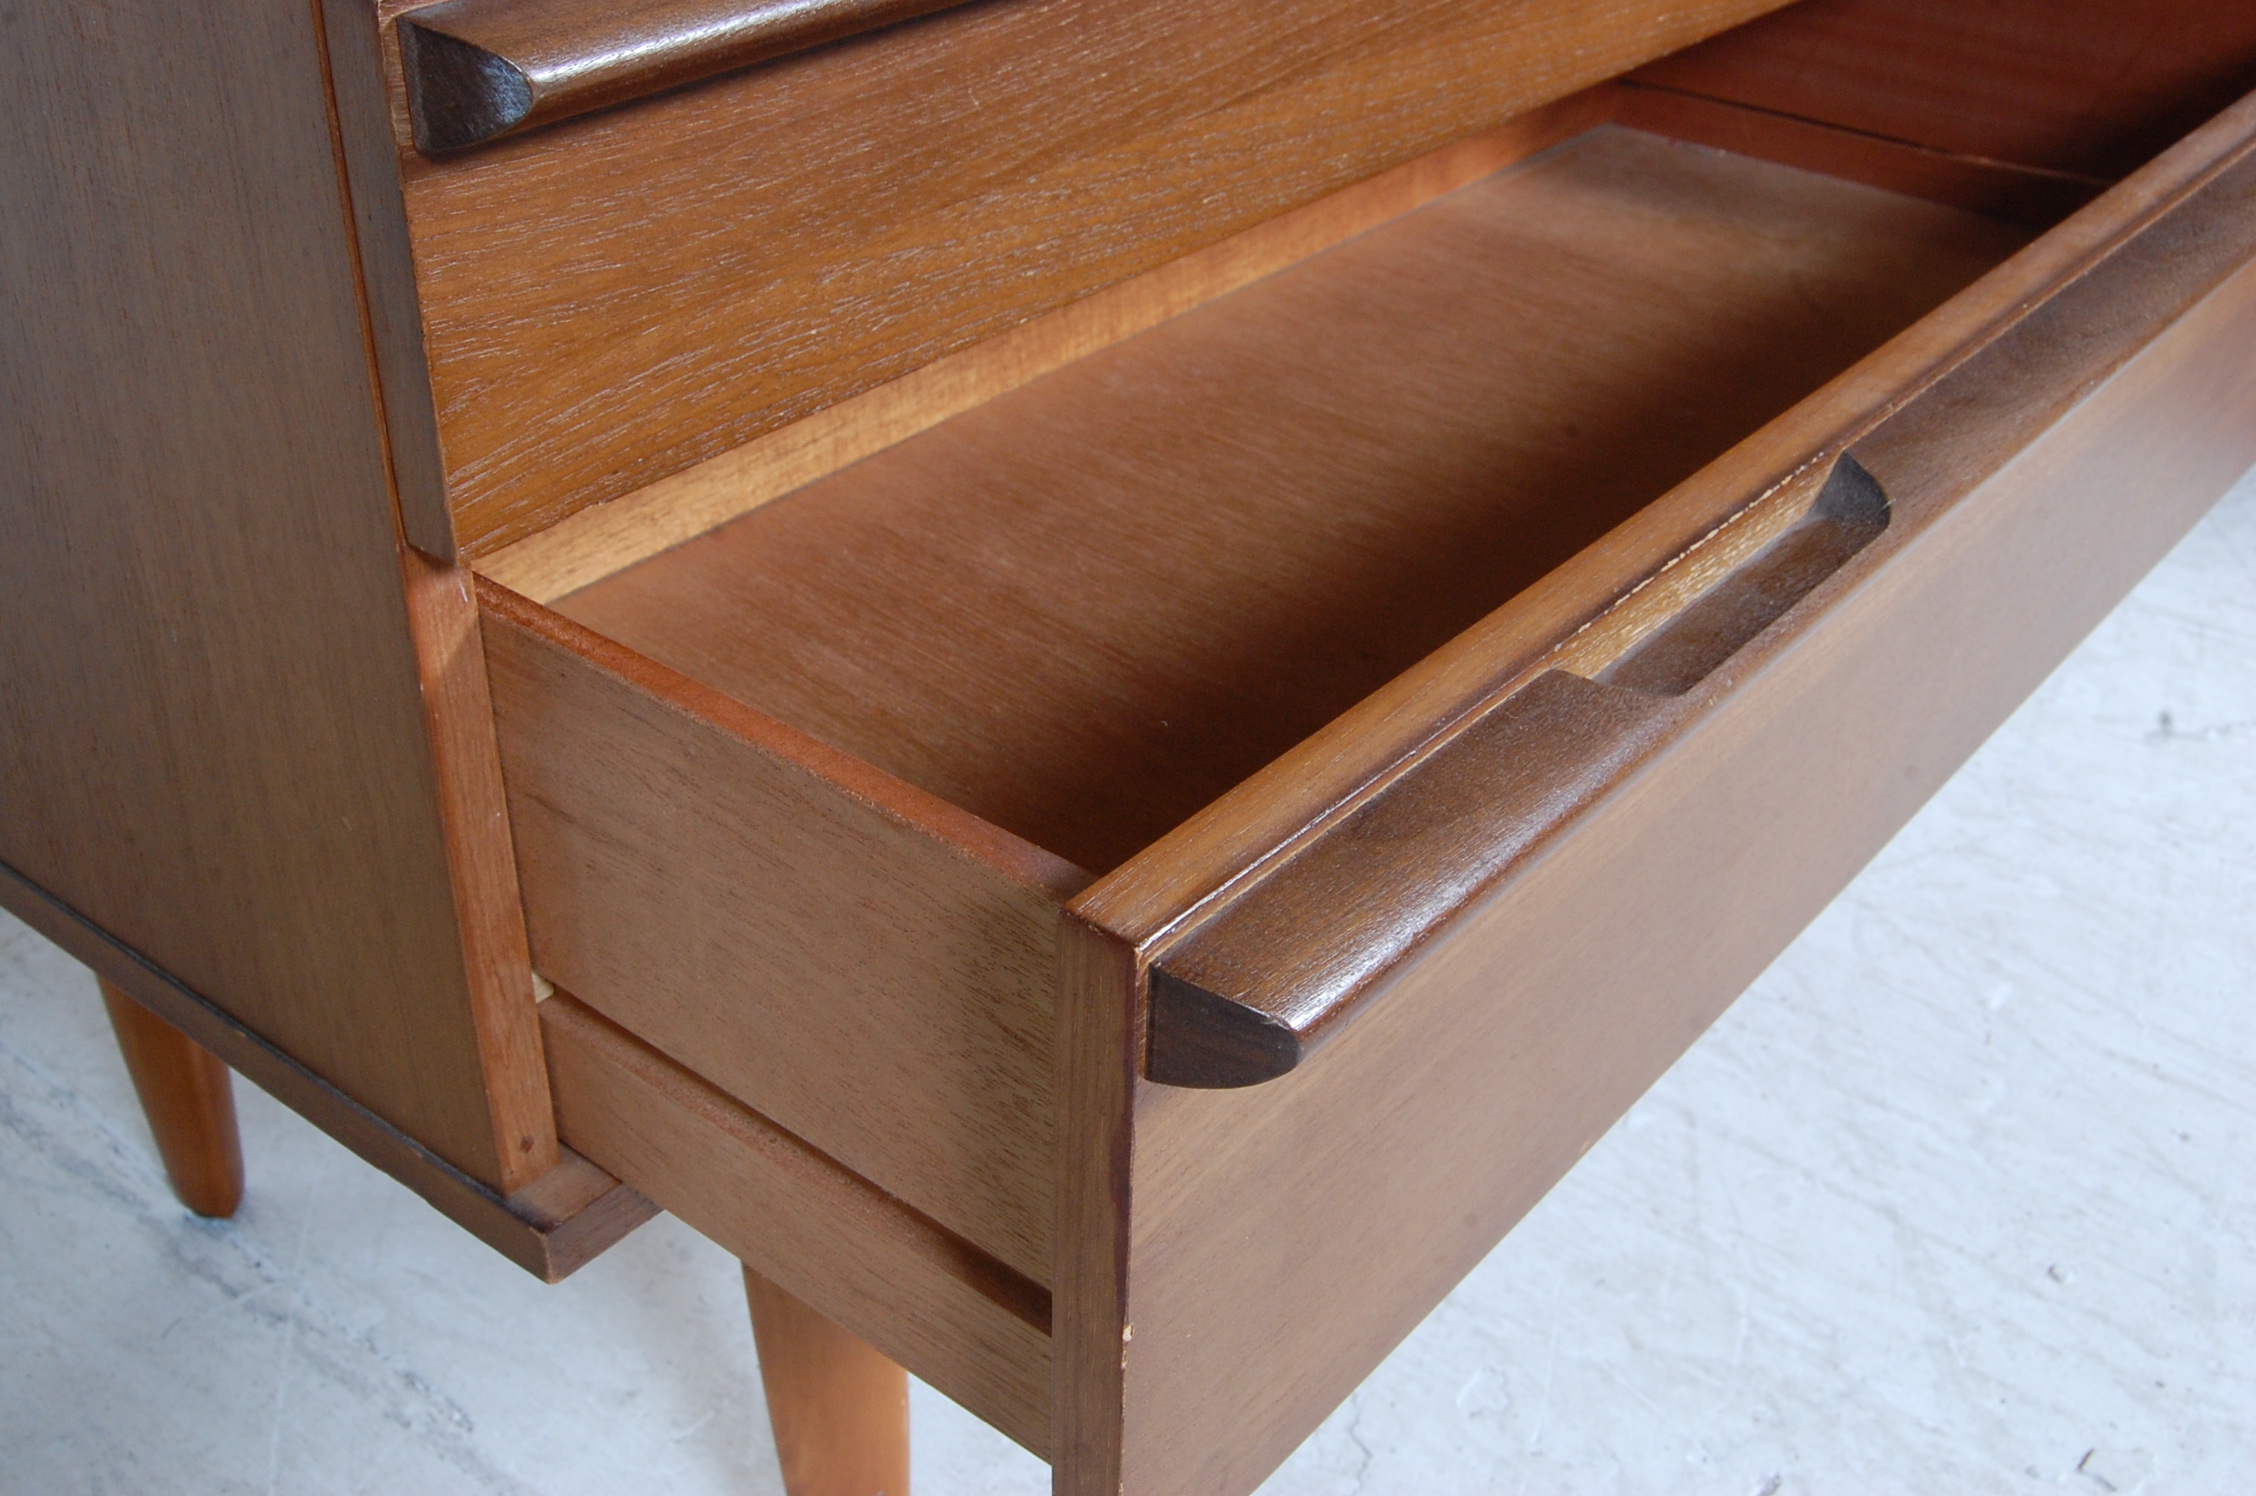 VINTAGE 20TH CENTURY TEAK WOOD DRESSING TABLE CHEST BY AVALON - Image 6 of 6